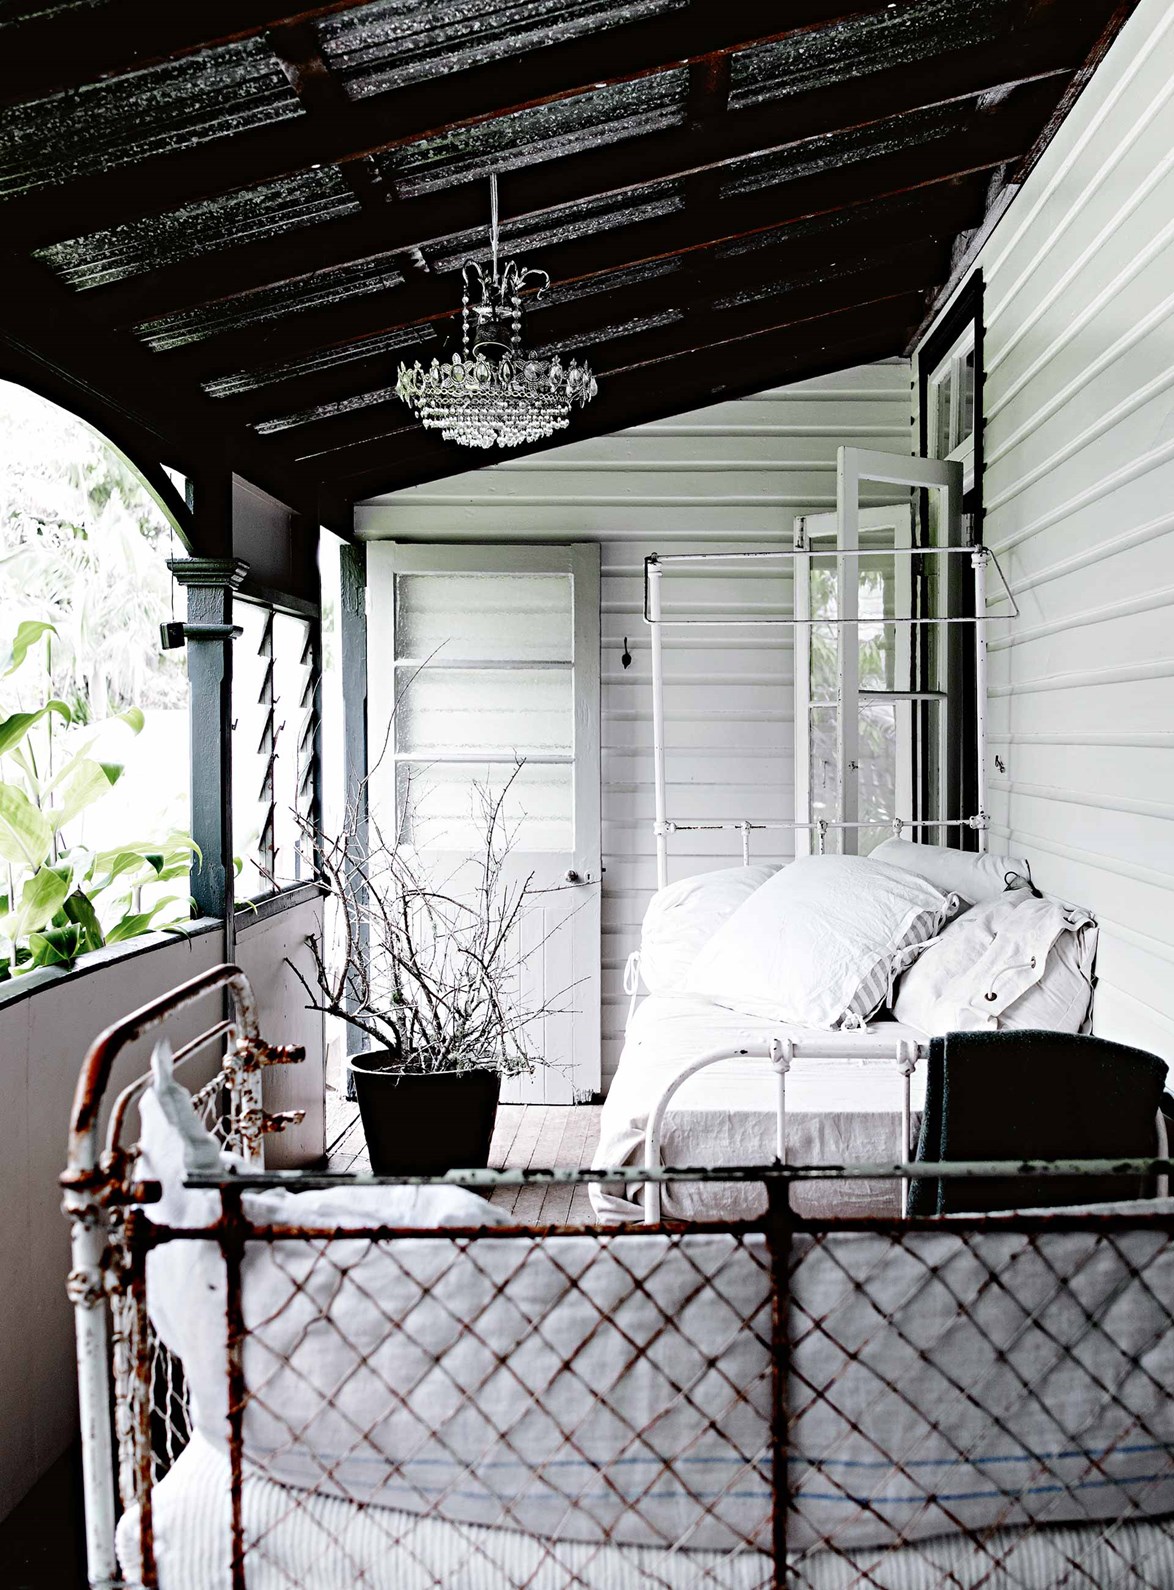 **Get a daybed (or two!)**<p>
The French look is as much about comfort as it is about style, so make sure you've got a chic space to sit back and unwind. These daybeds on the verandah of a [dressmaker's home in Byron Bay](https://www.homestolove.com.au/dressmakers-white-vintage-interior-in-the-byron-bay-hinterland-13719|target="_blank") are just the ticket. <p>
<p>*Photo: Mark Roper*<p>